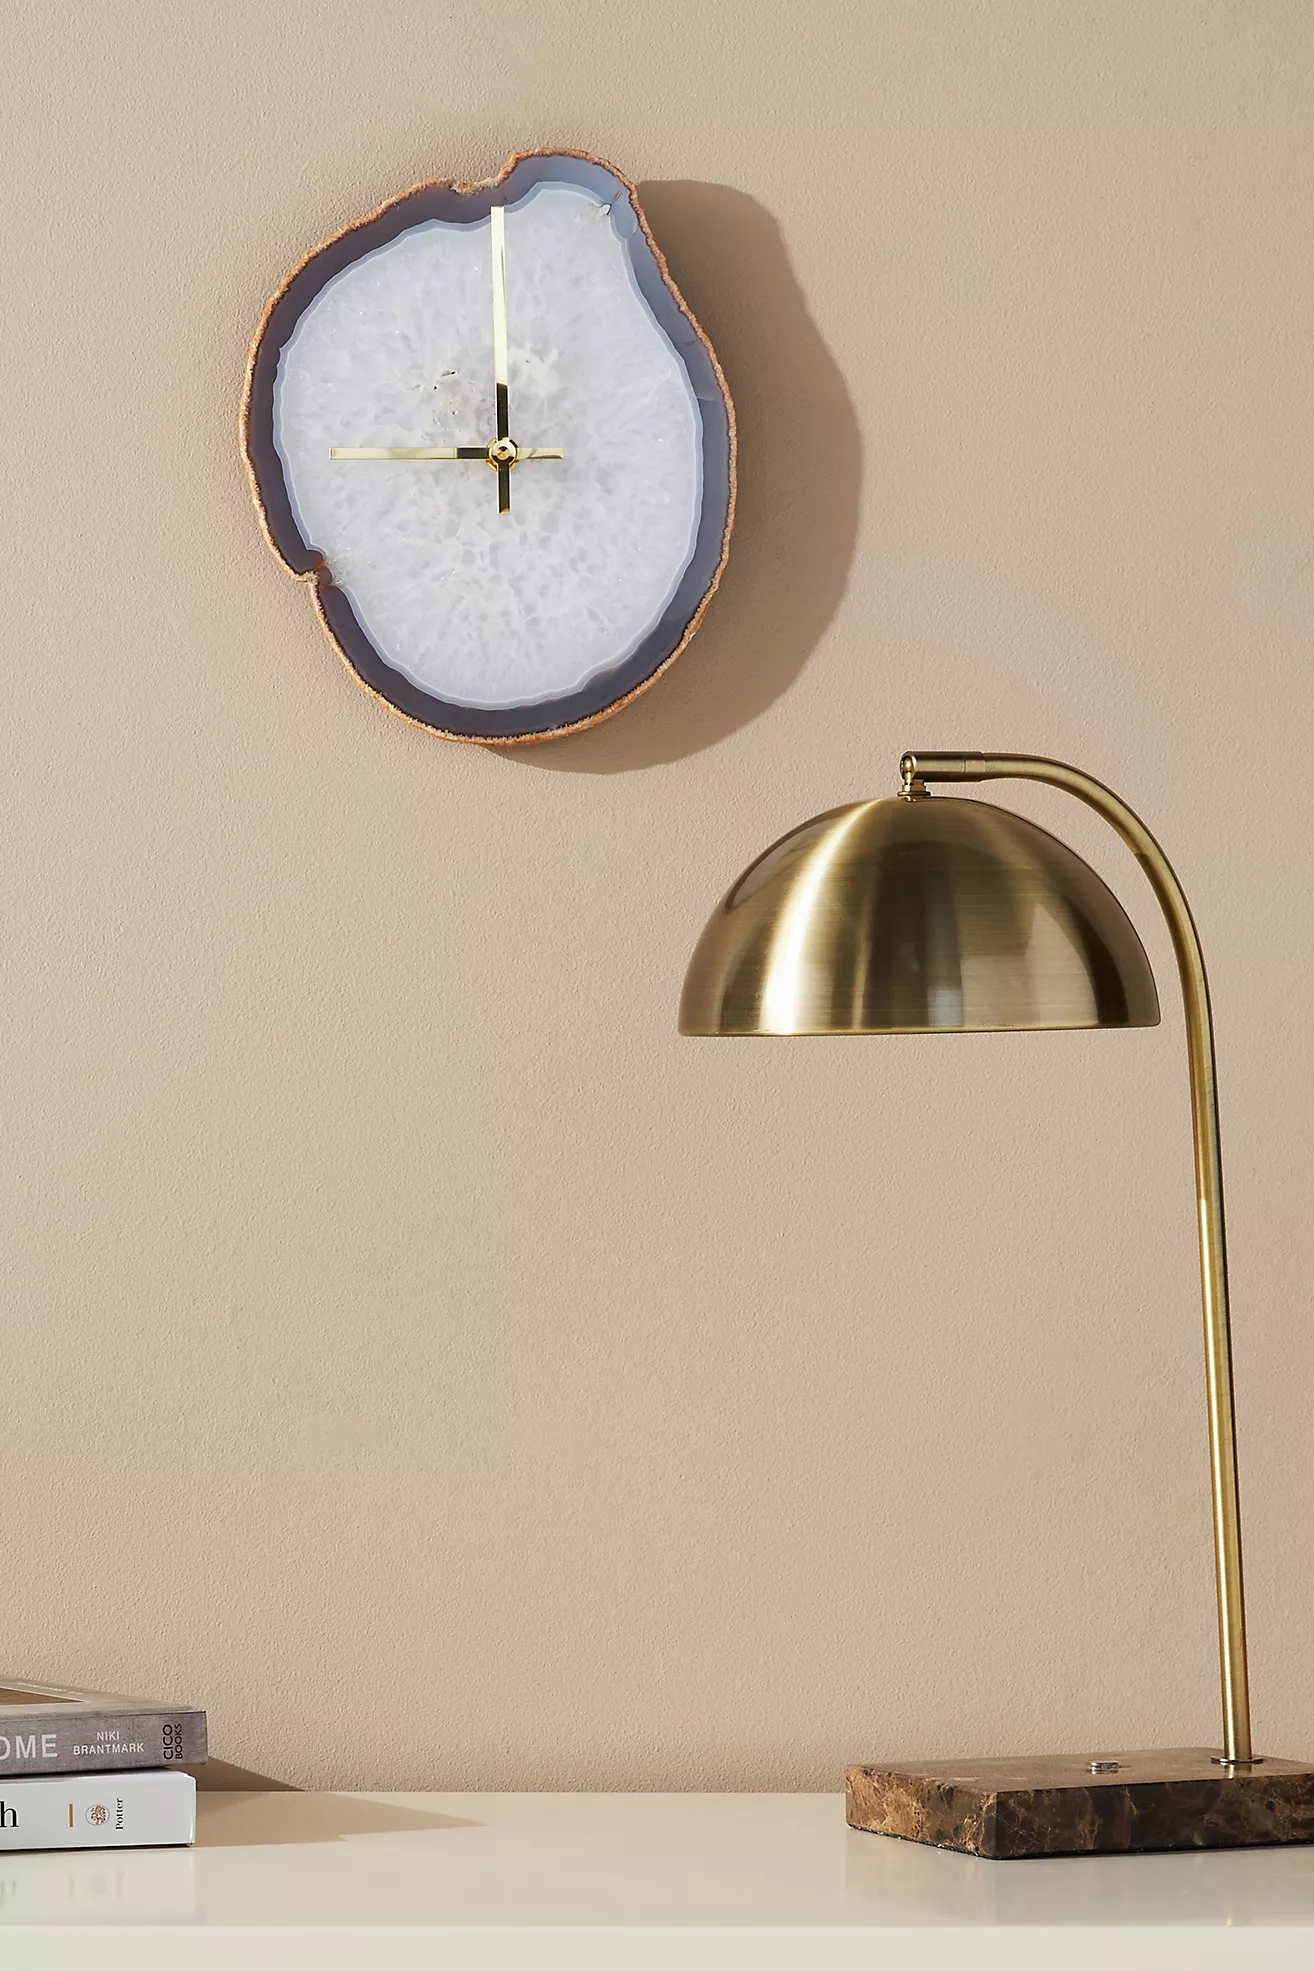 Use a Small Clock that Looks Like Jewelry